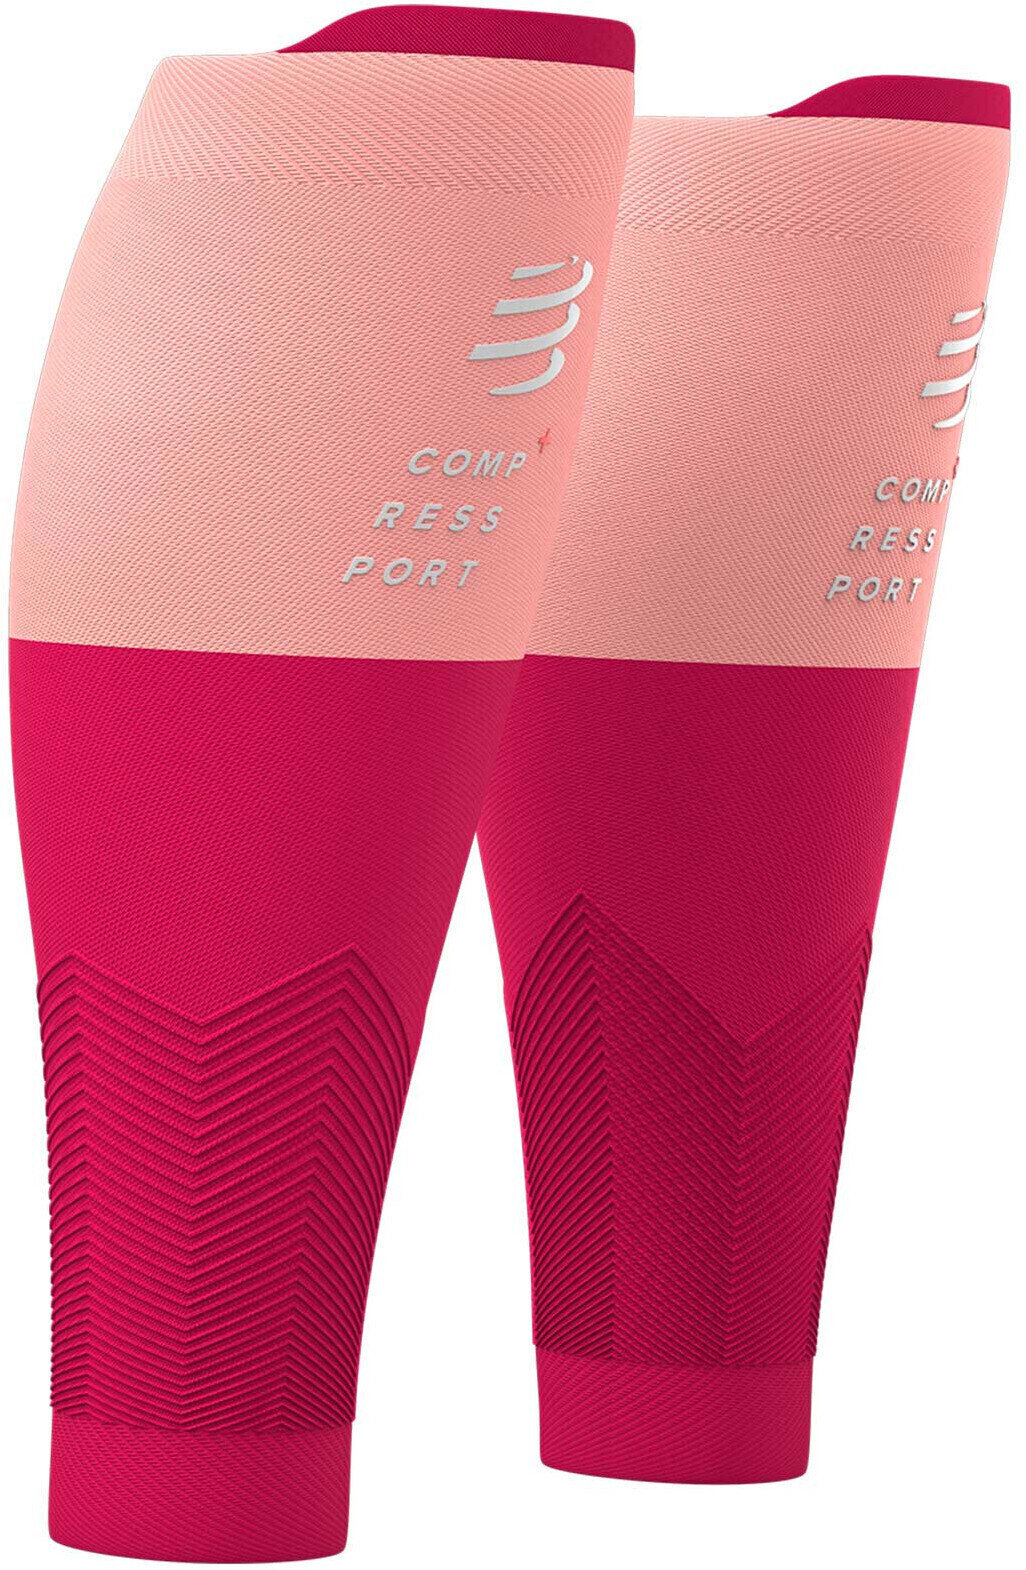 Calf covers for runners Compressport R2v2 Pink T1 Calf covers for runners